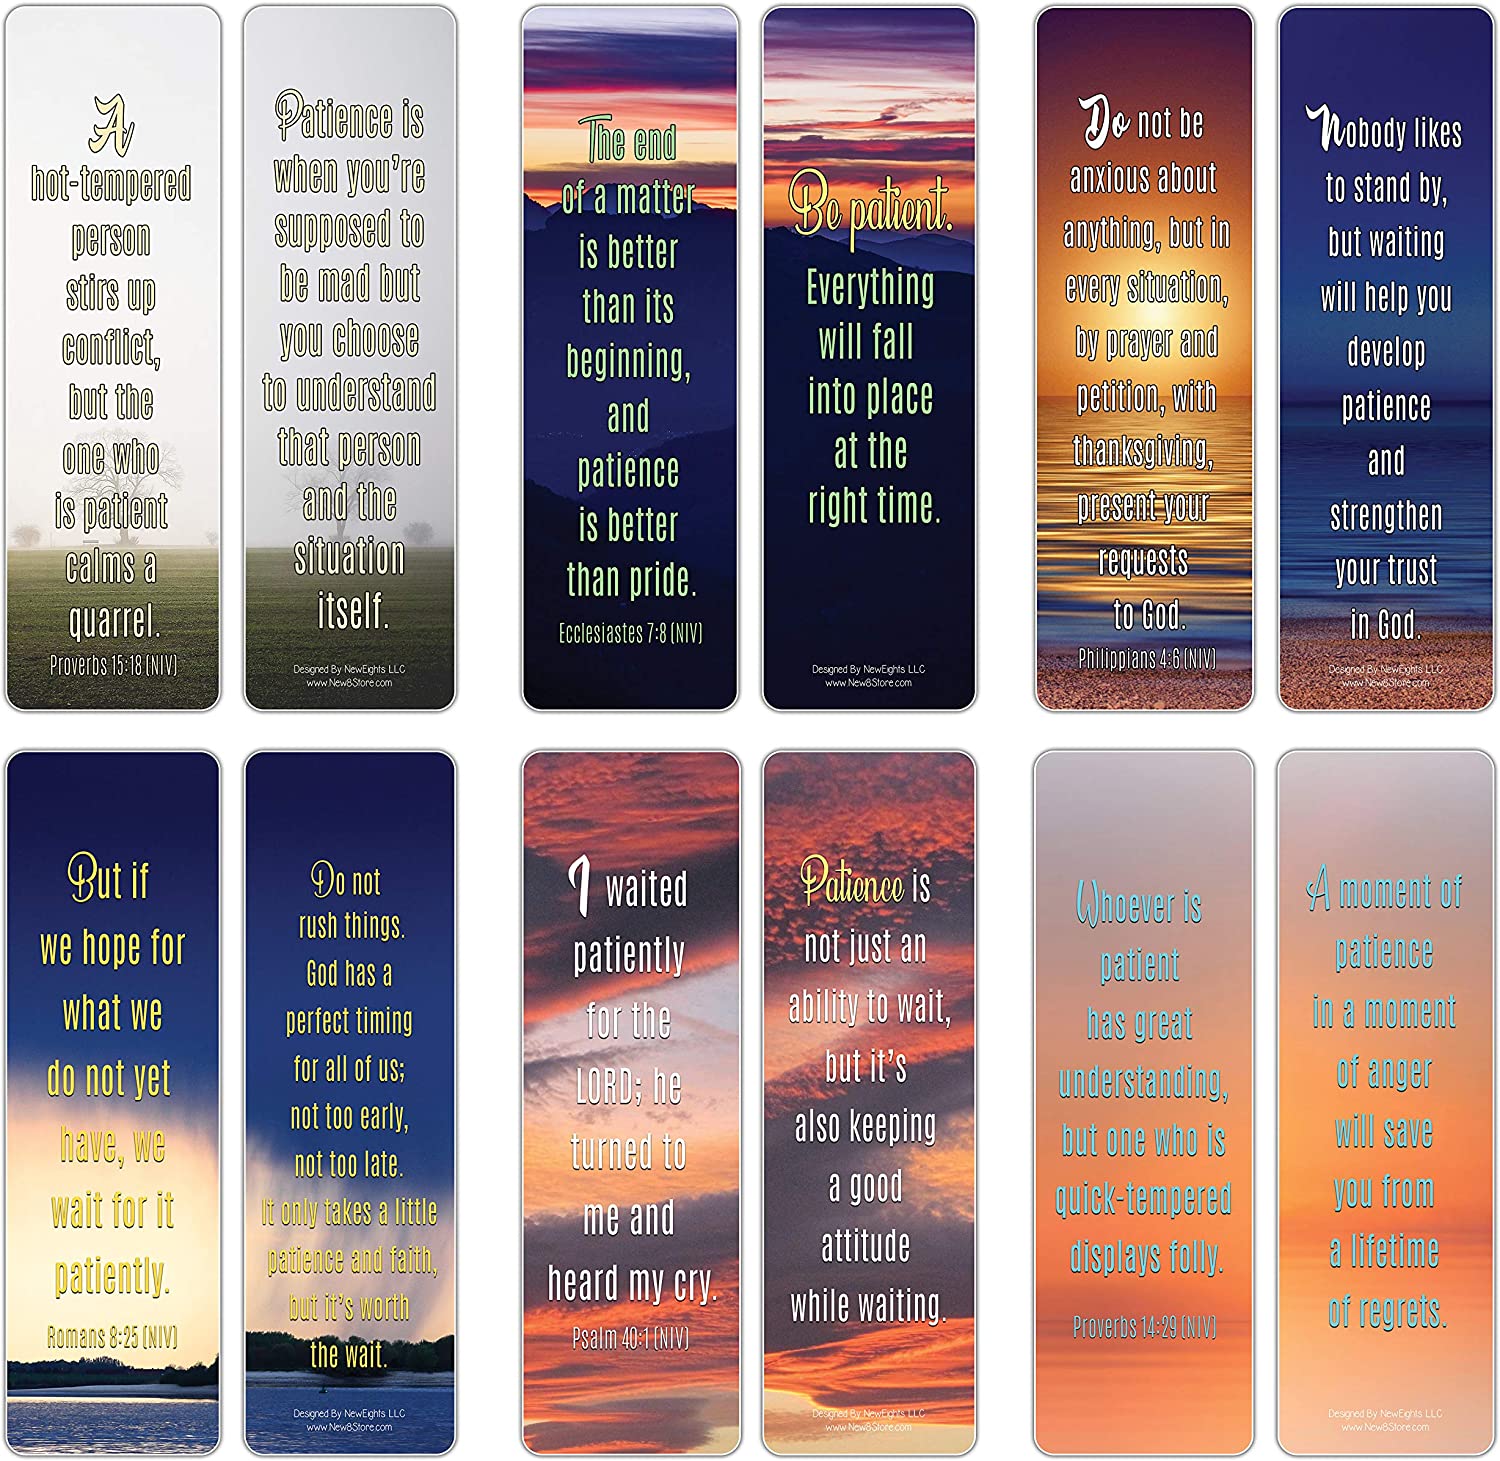 NewEights Bible Verses and Quotes on Patience Bulk Bookmarks (60-Pack) – Awesome Learning Bookmarks for Men Women – Unique Book Reading Page Binders – Daily Inspirational Thoughts